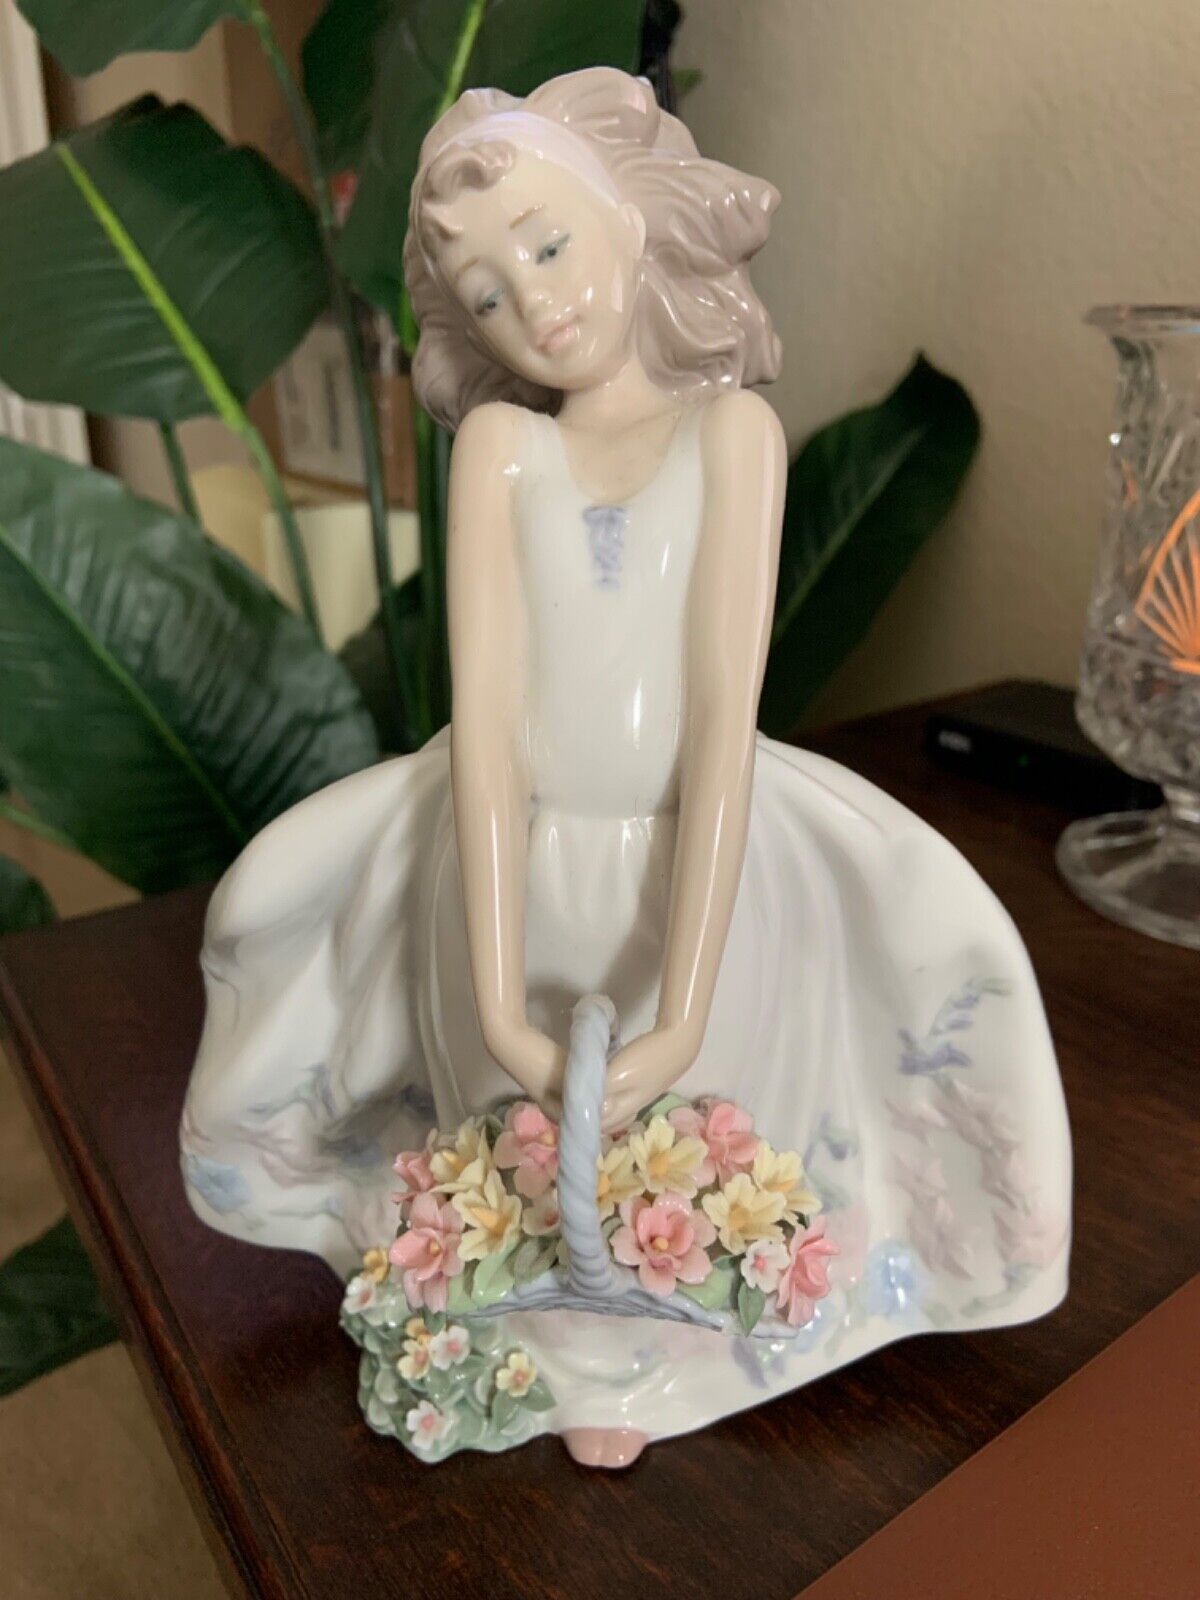 Lladro WILDFLOWERS Girl with Basket 6647 MINT Condition in Box Retail $975